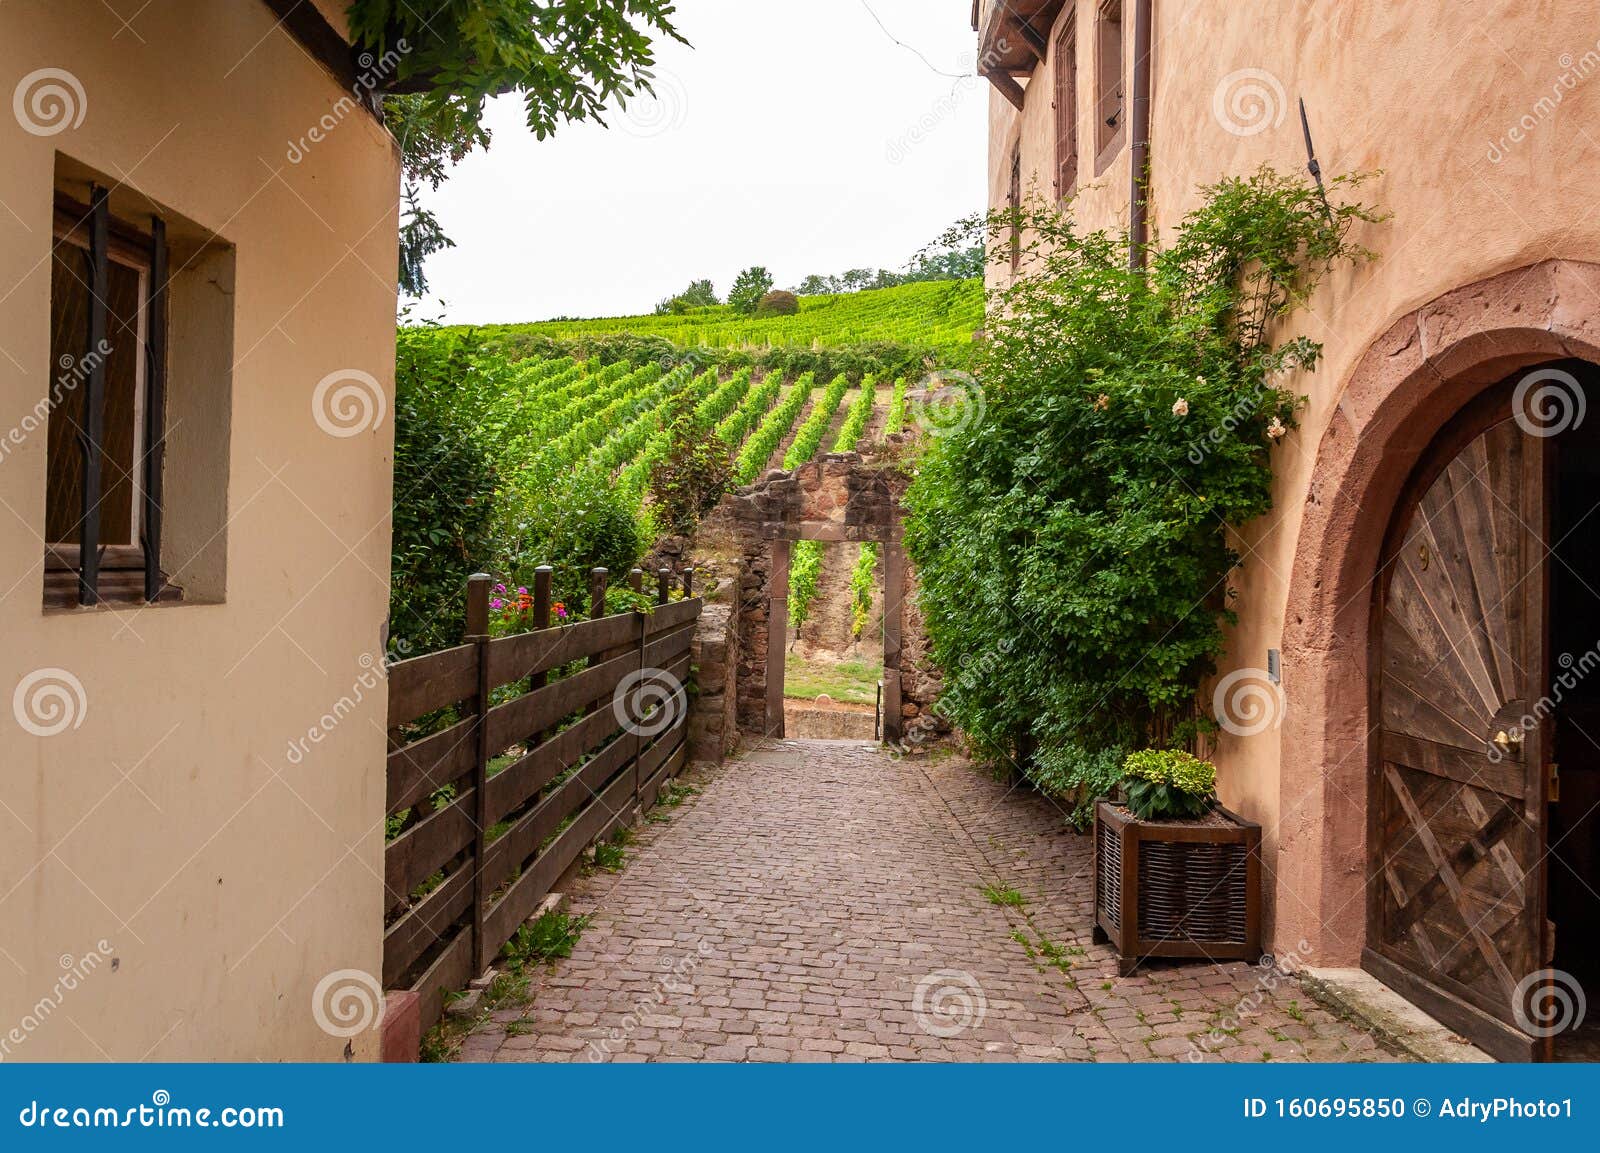 riquewihr in alsace, france. enchanting medieval village. view of the vineyards from the old village within the walls.